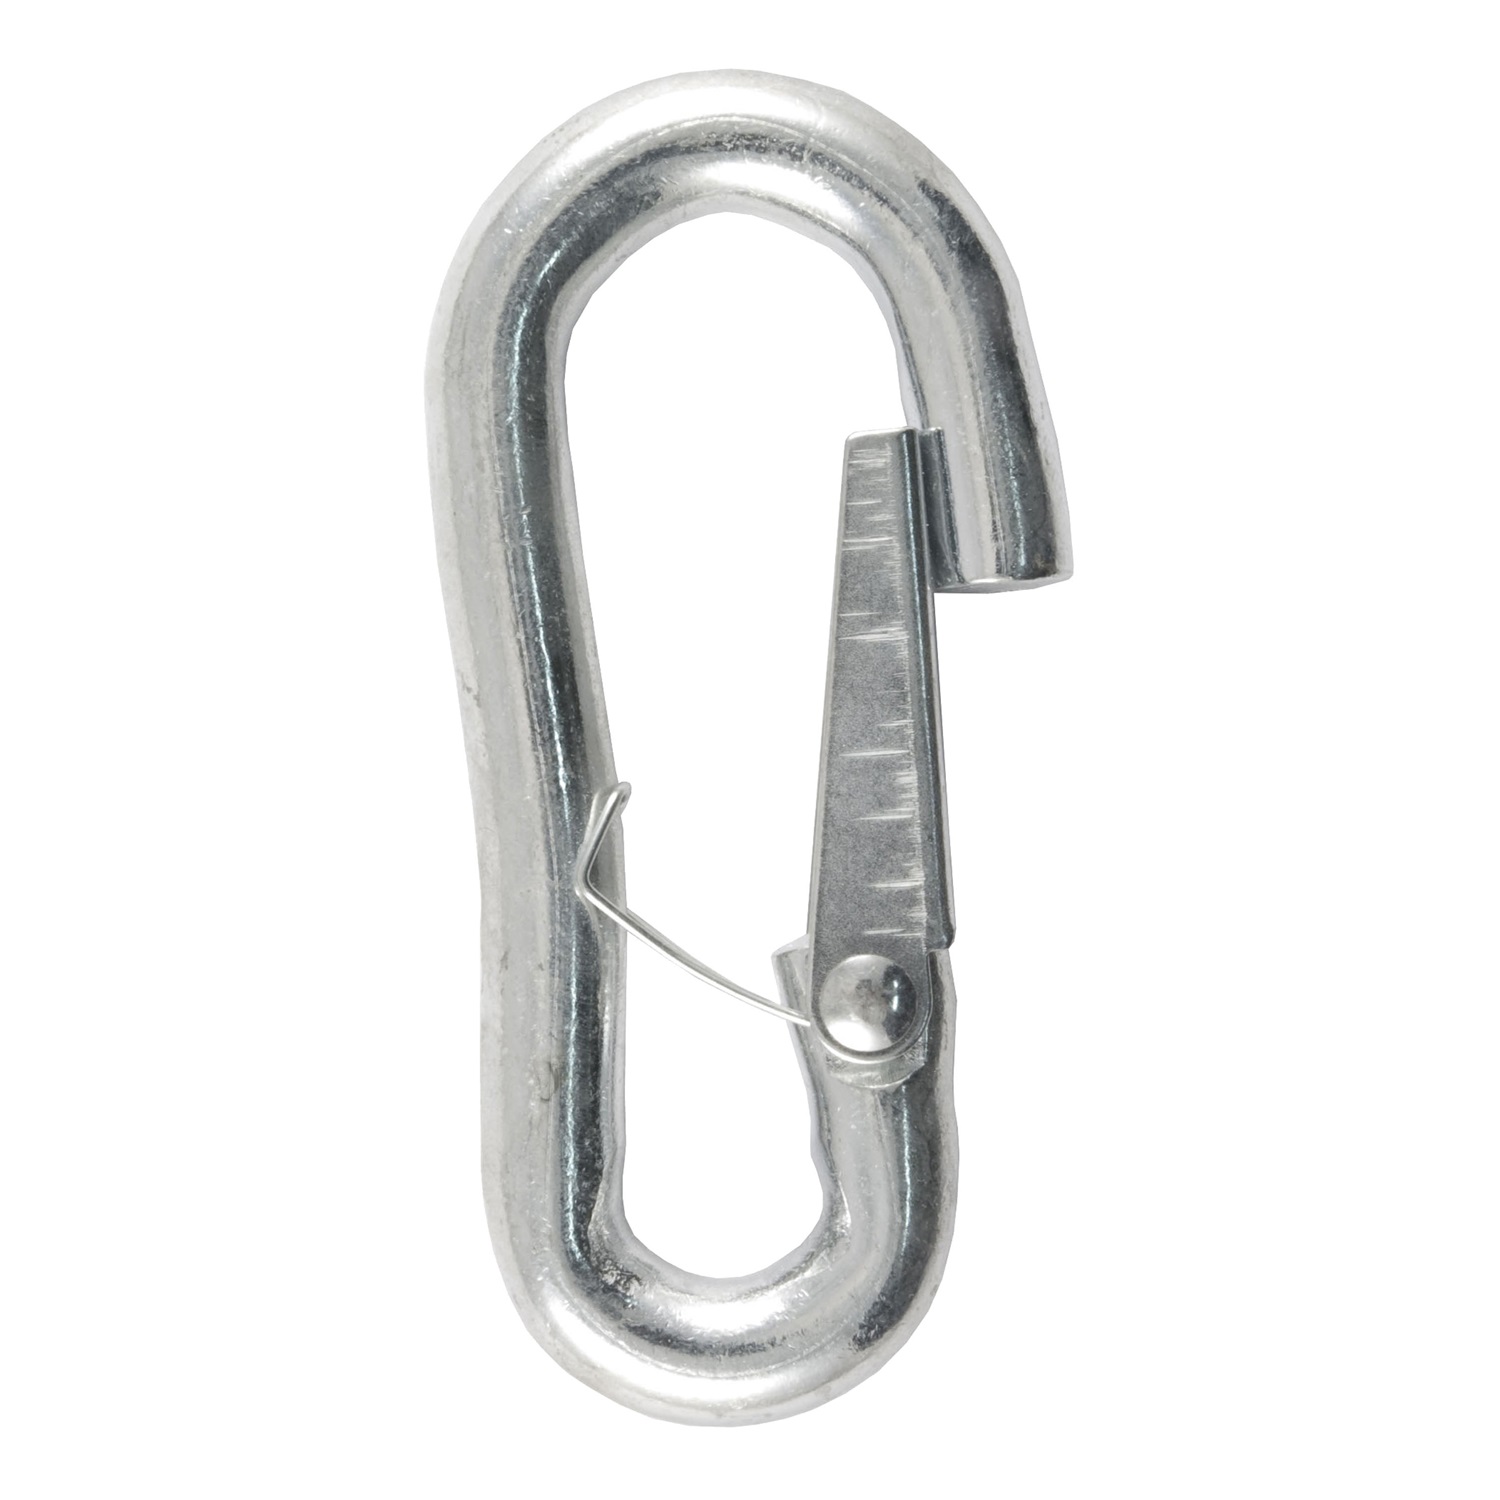 CURT Manufacturing CURT Manufacturing 81277 Class III; S-Hook w/Safety Latch  Fits